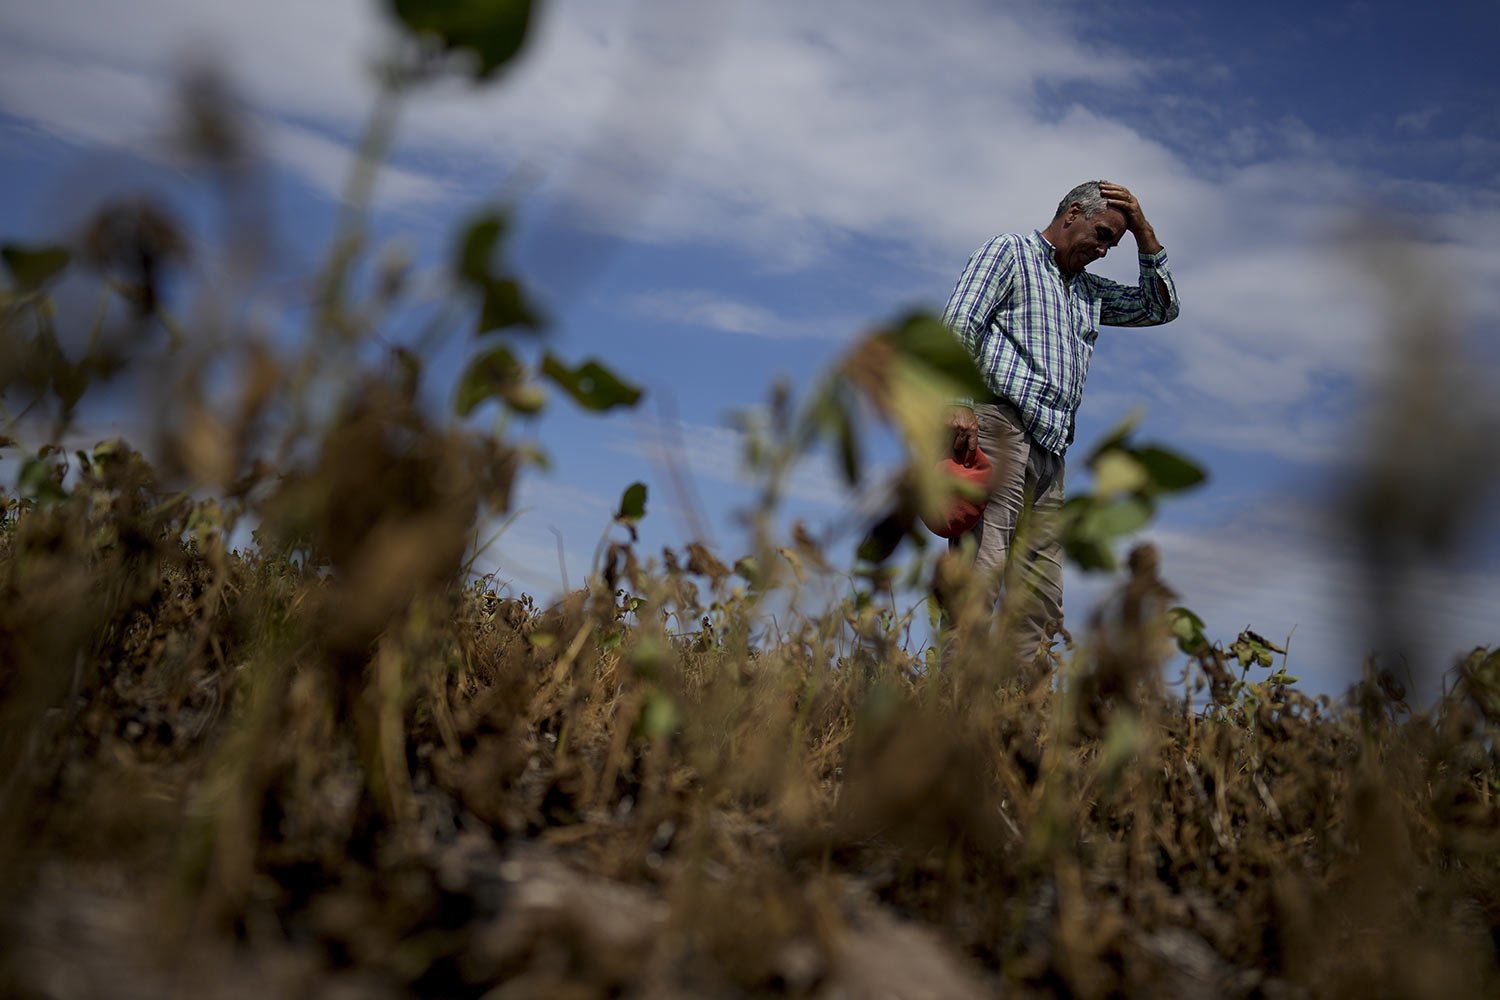  Martin Sturla stands in in his dry soybean field amid a drought in San Antonio de Areco, Argentina, March 20, 2023. Sturla said he lost 85% of his harvest of soybean and corn due to the drought. (AP Photo/Natacha Pisarenko) 